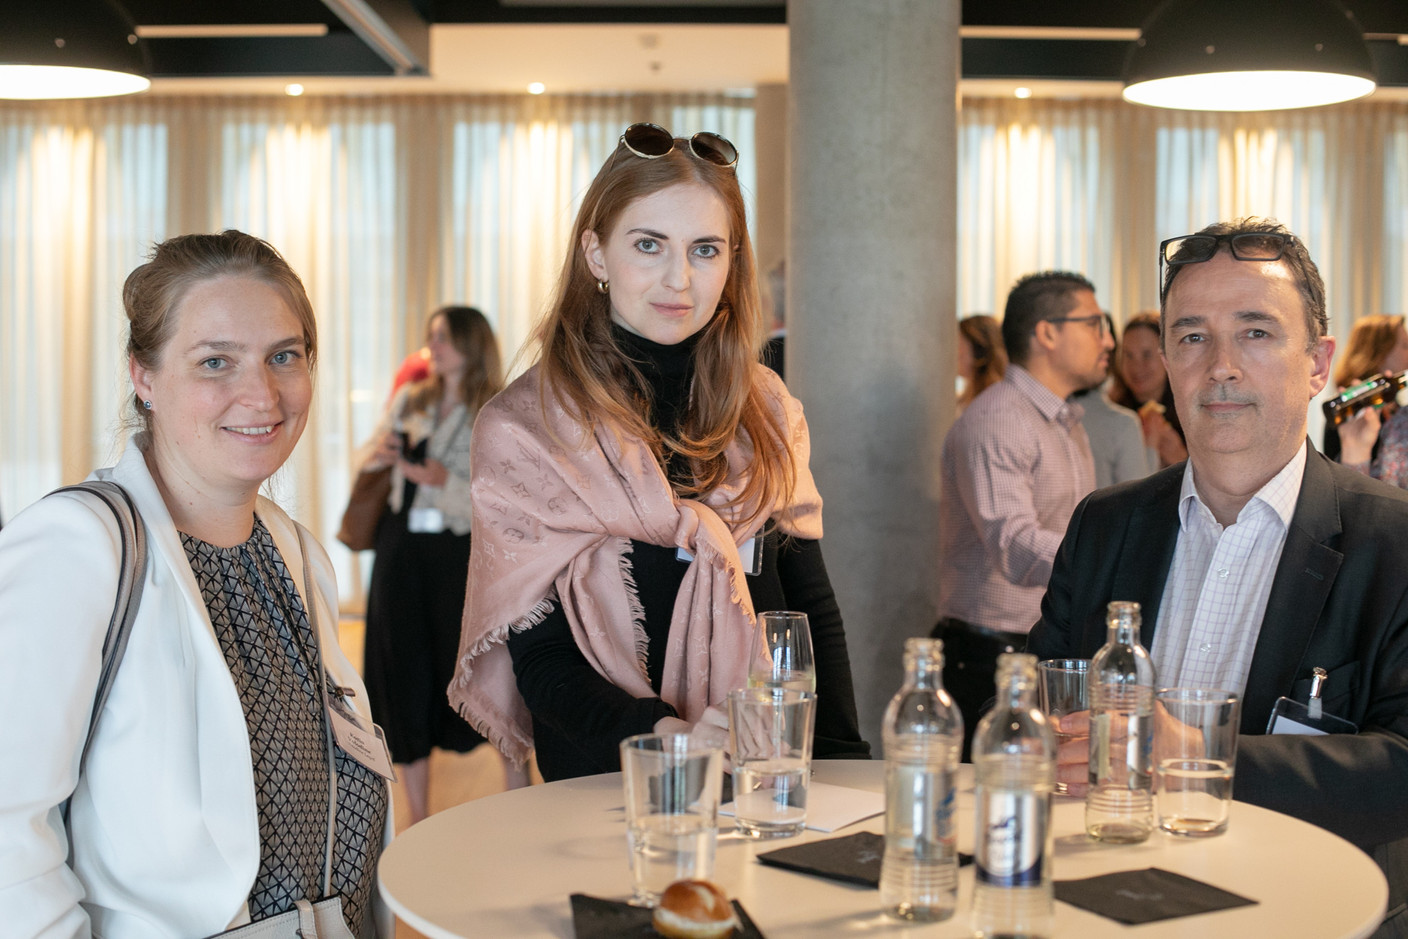  Attendees at 2023 Cryptoassets Management Conference. Photo: Matic Zorman / Maison Moderne